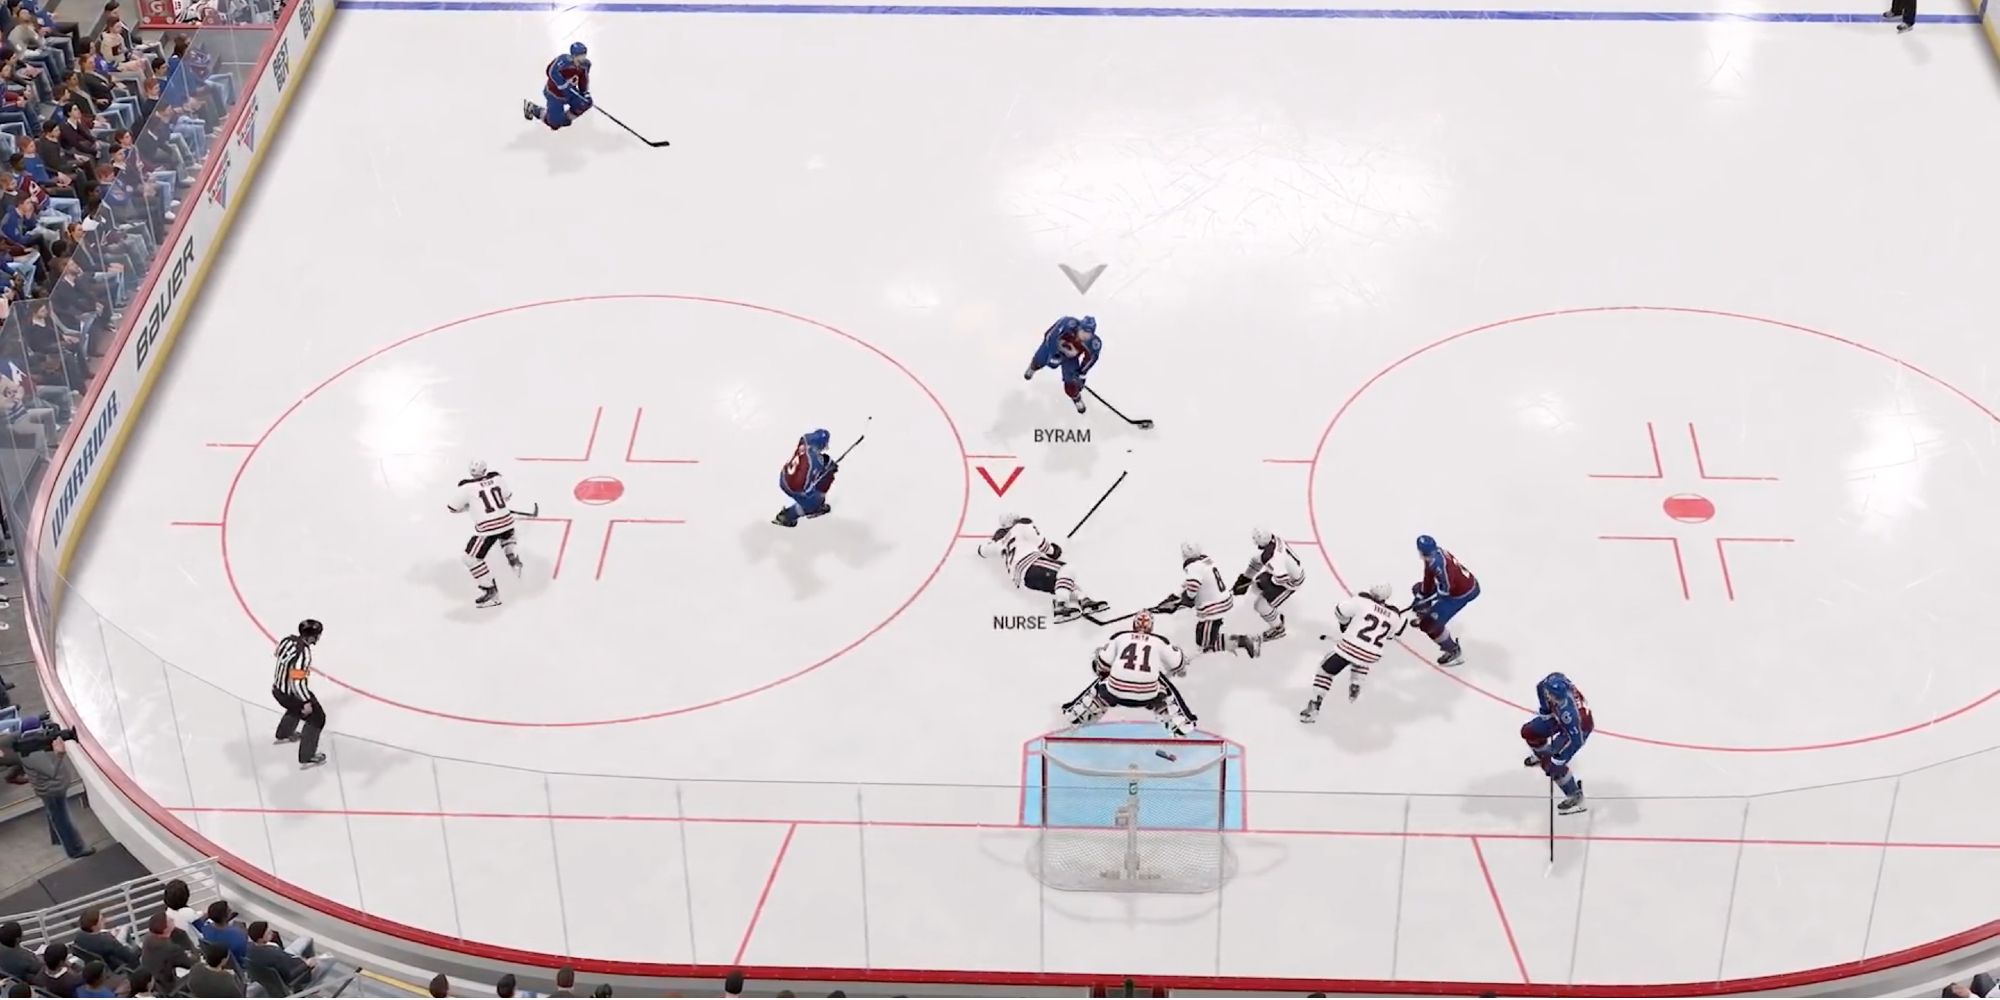 NHL 22 - Demoralize Opponents - Player charges across the ice with the puck